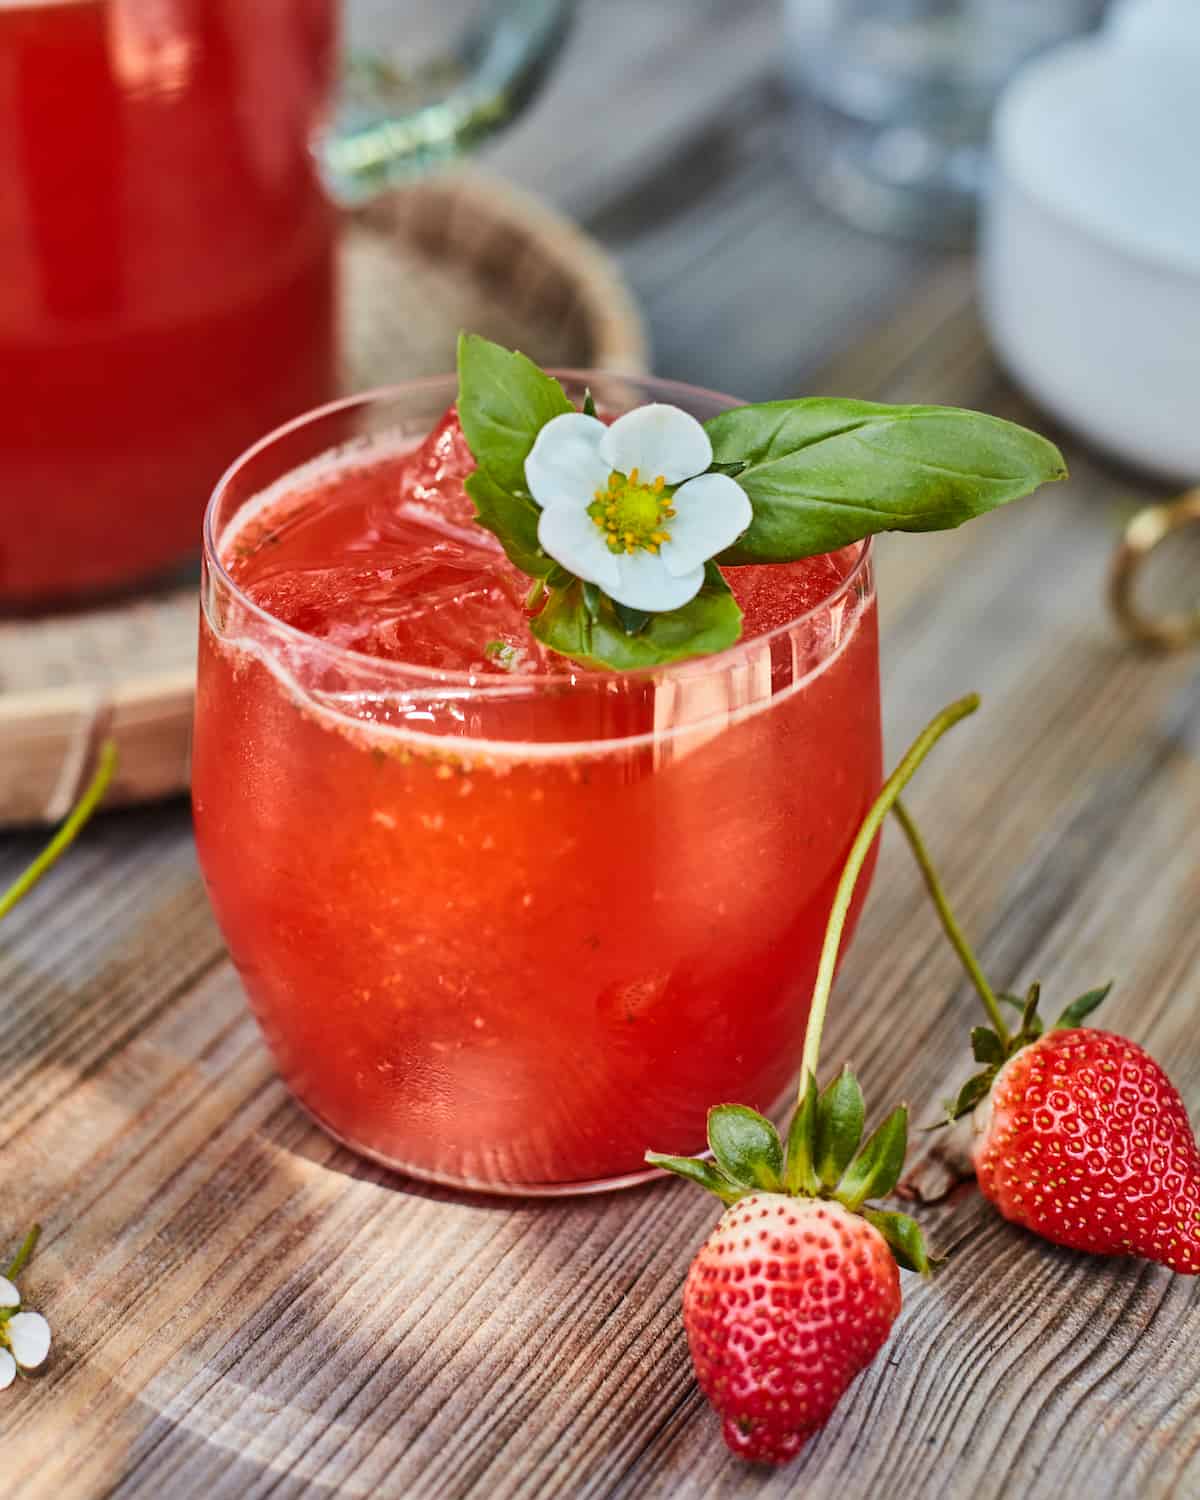 Strawberry basil lemonade sitting on a wooden outdoor table.  